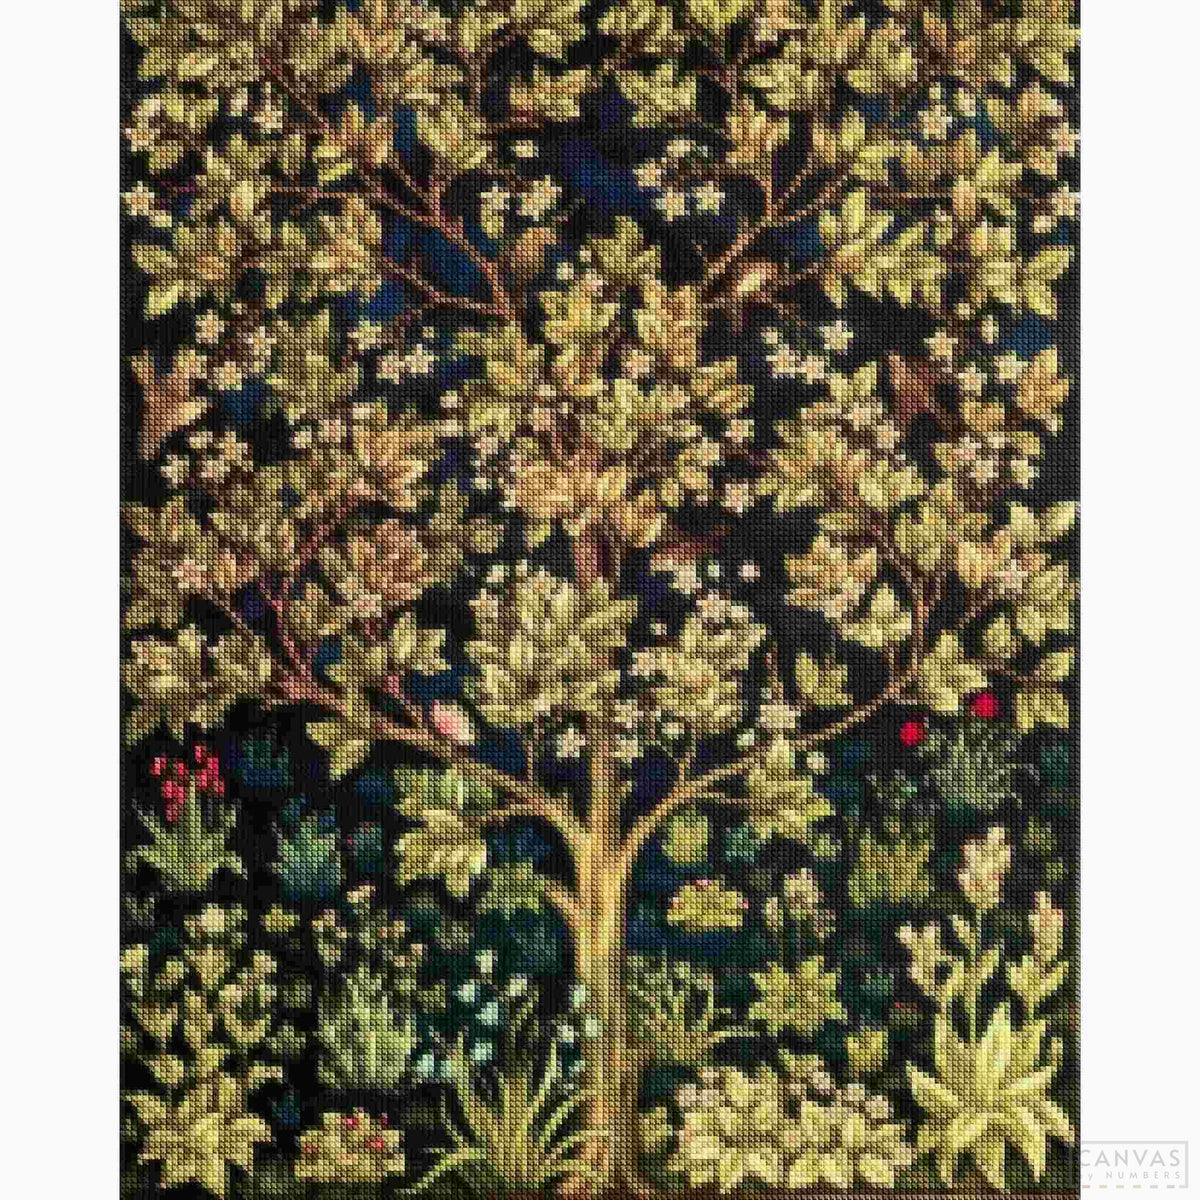 Tree of Life - Diamond Painting-Create serenity in your space with this Tree of Life diamond painting kit. Inspired by William Morris, it offers a complex yet calming craft experience.-Canvas by Numbers